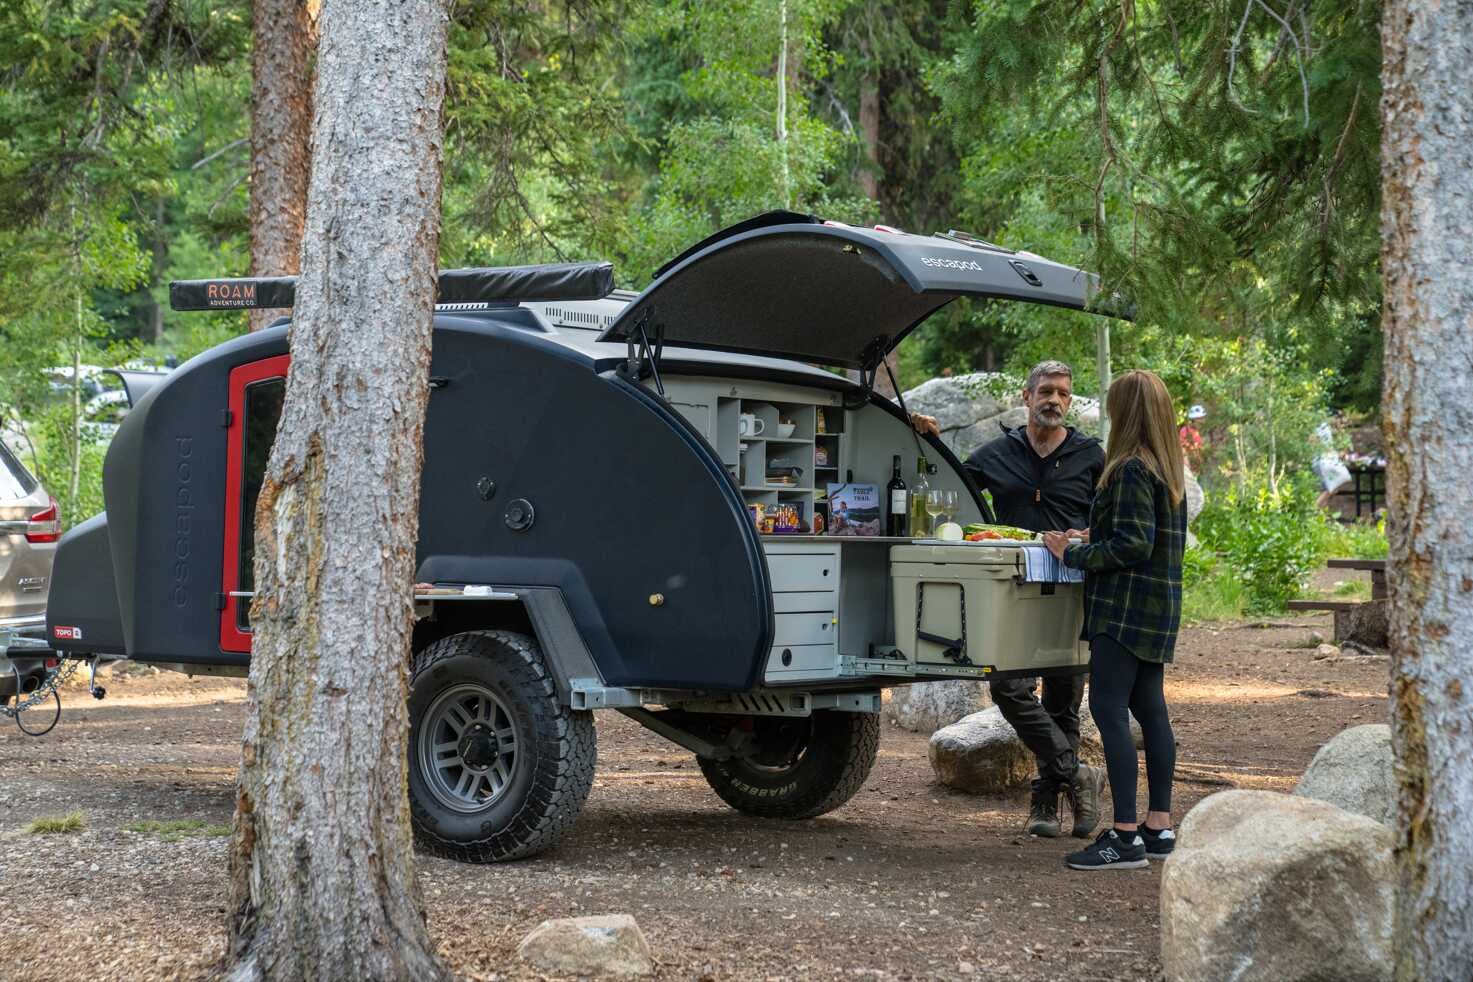 A middle aged couple is gathered around the kitchen galley of a TOPO2 teardrop camper enjoying some wine.